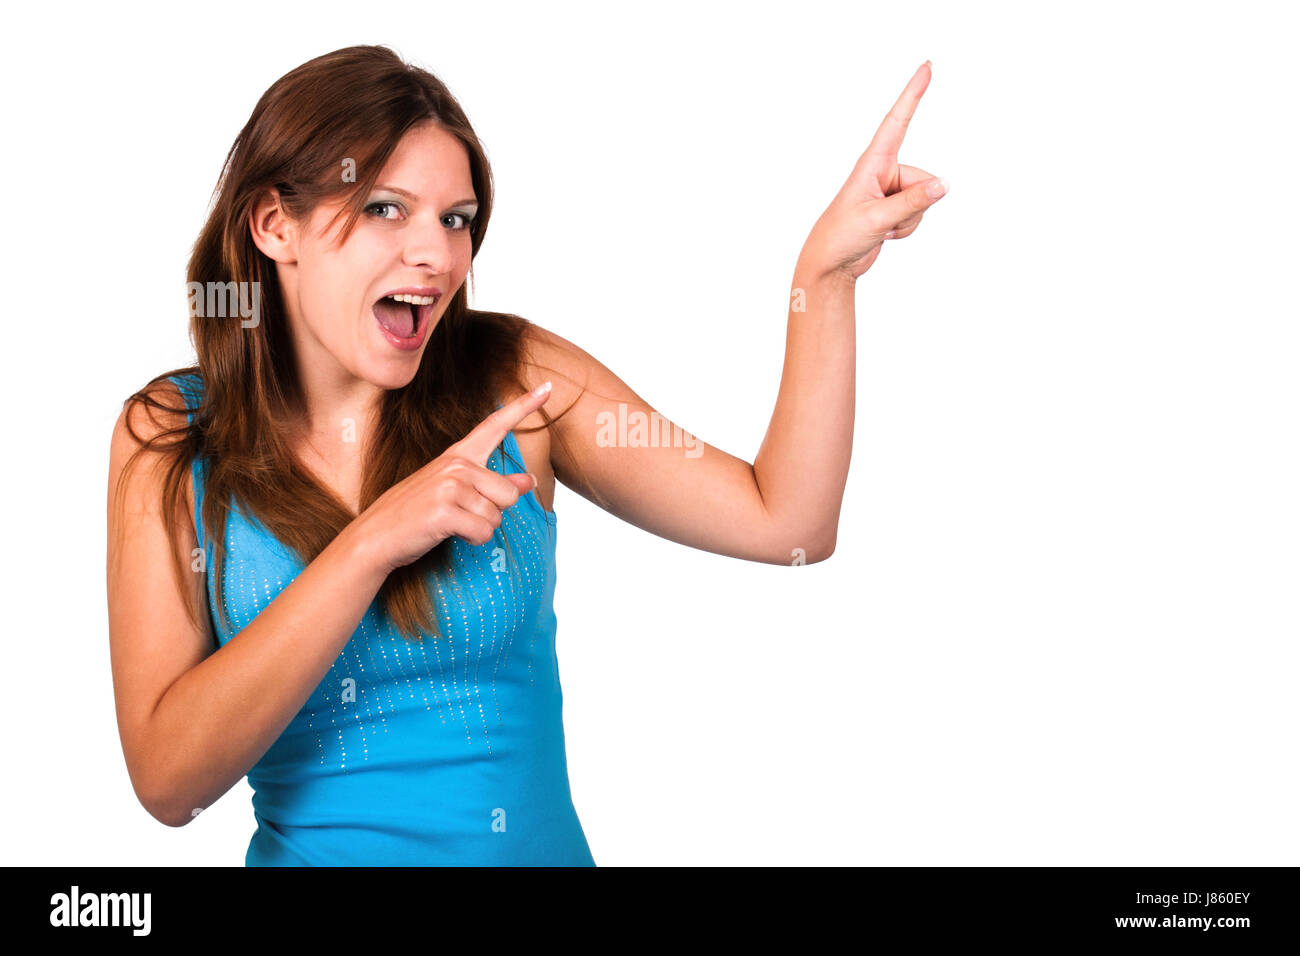 woman indicate show finger mood upper part of the body party celebration Stock Photo